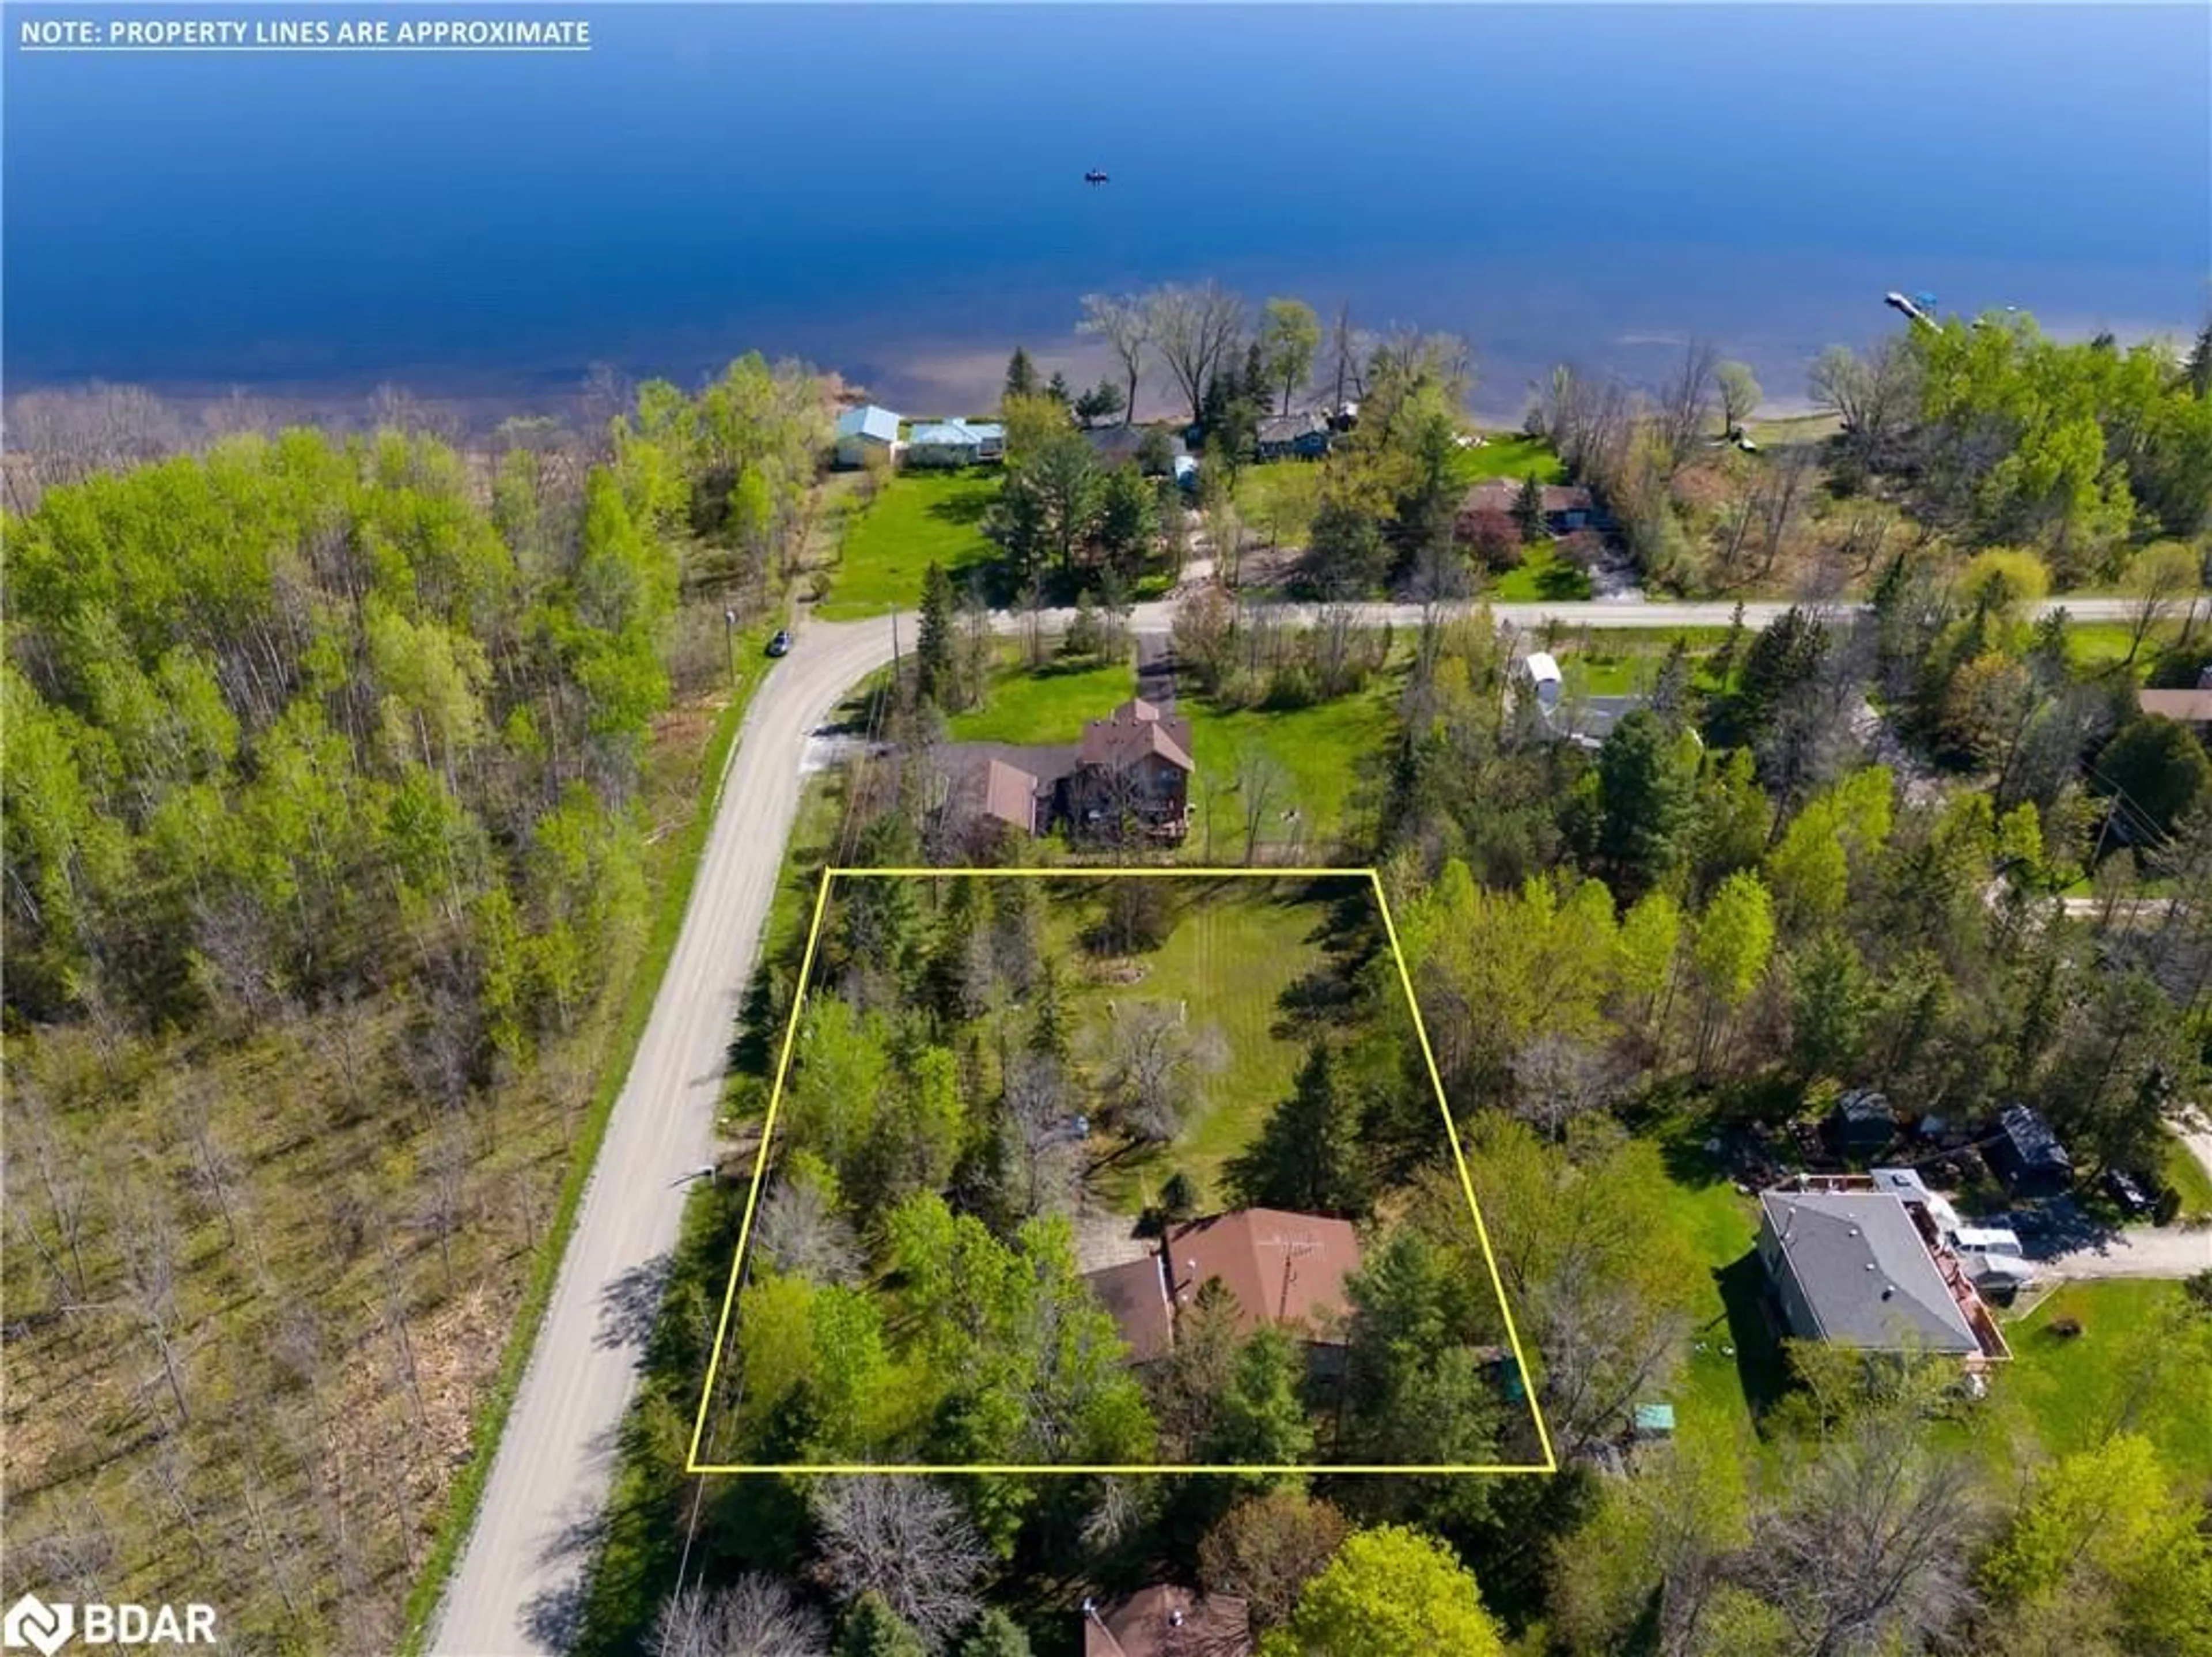 Lakeview for 53 Bass Bay Dr, Victoria Harbour Ontario L0K 2A0